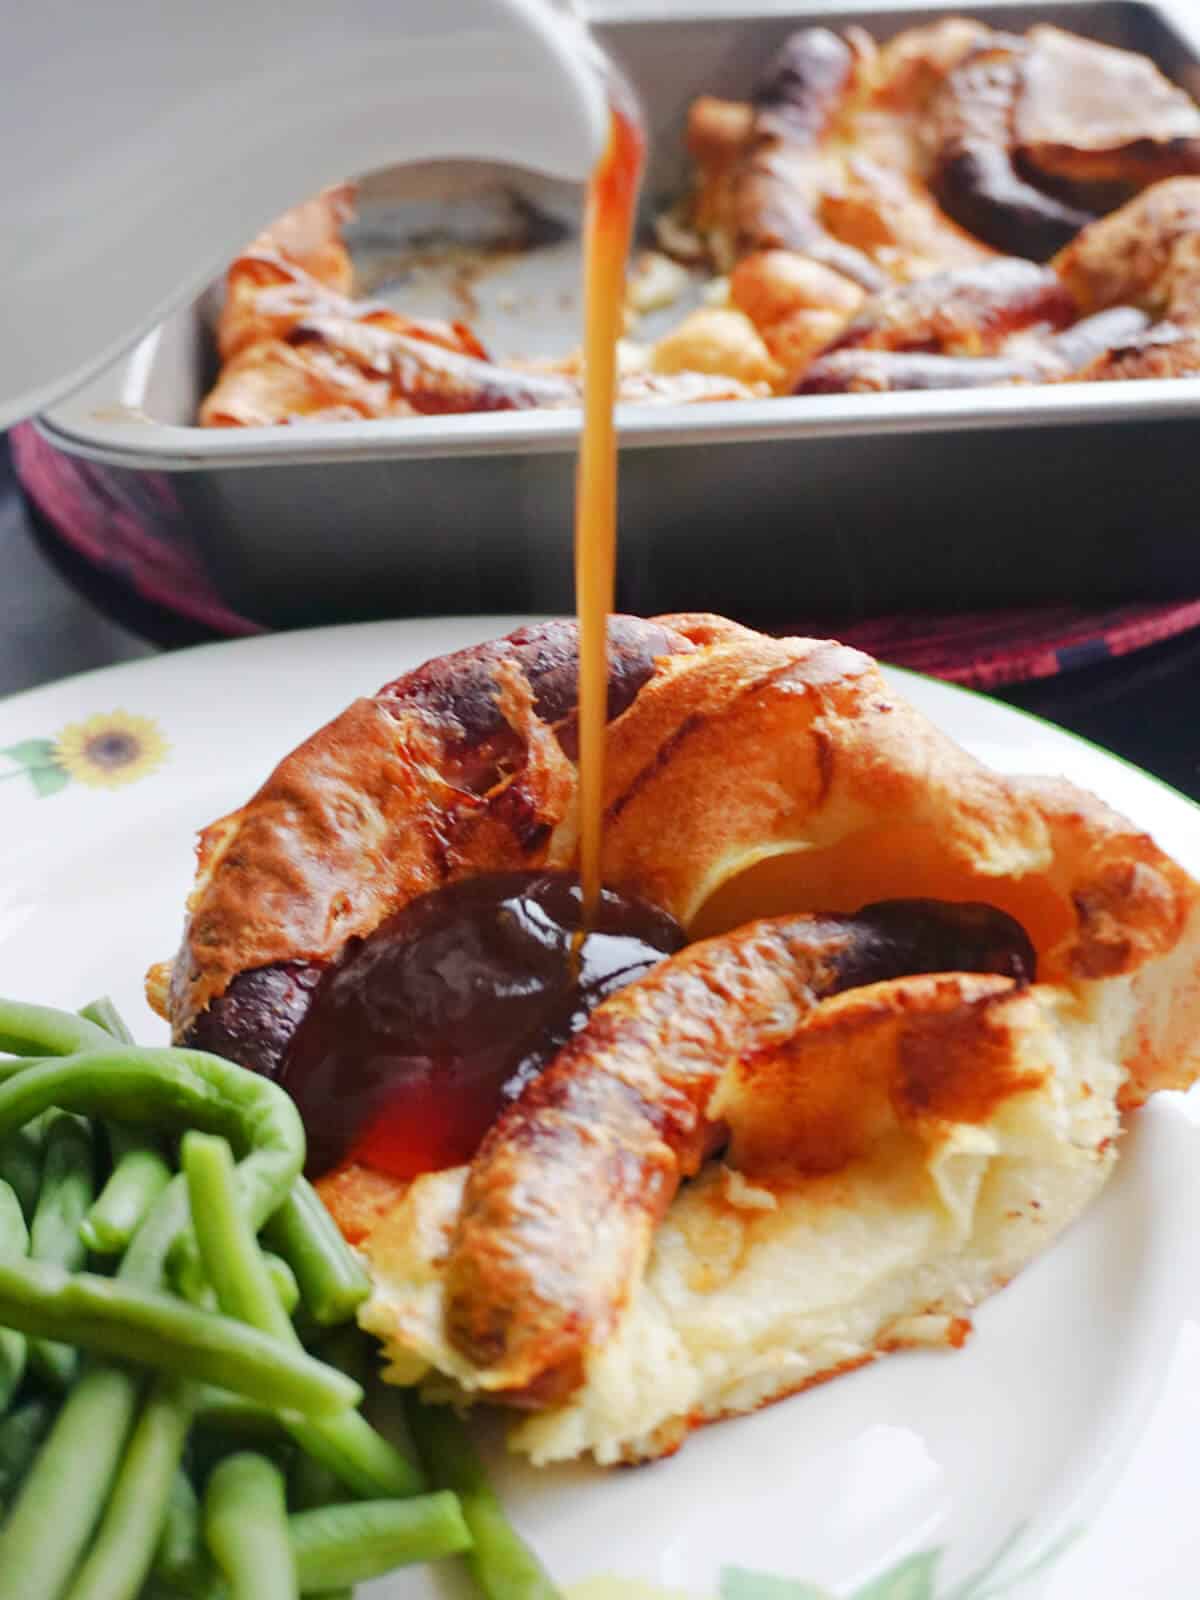 Gravy being poured over a slice of toad in the hole.